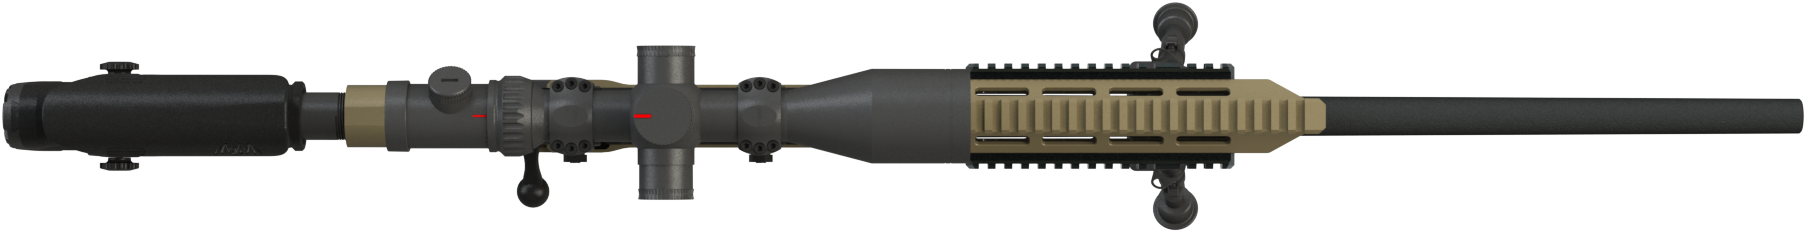 Top Down Rifle Png - Rifle Top View (1920x1080), Png Download